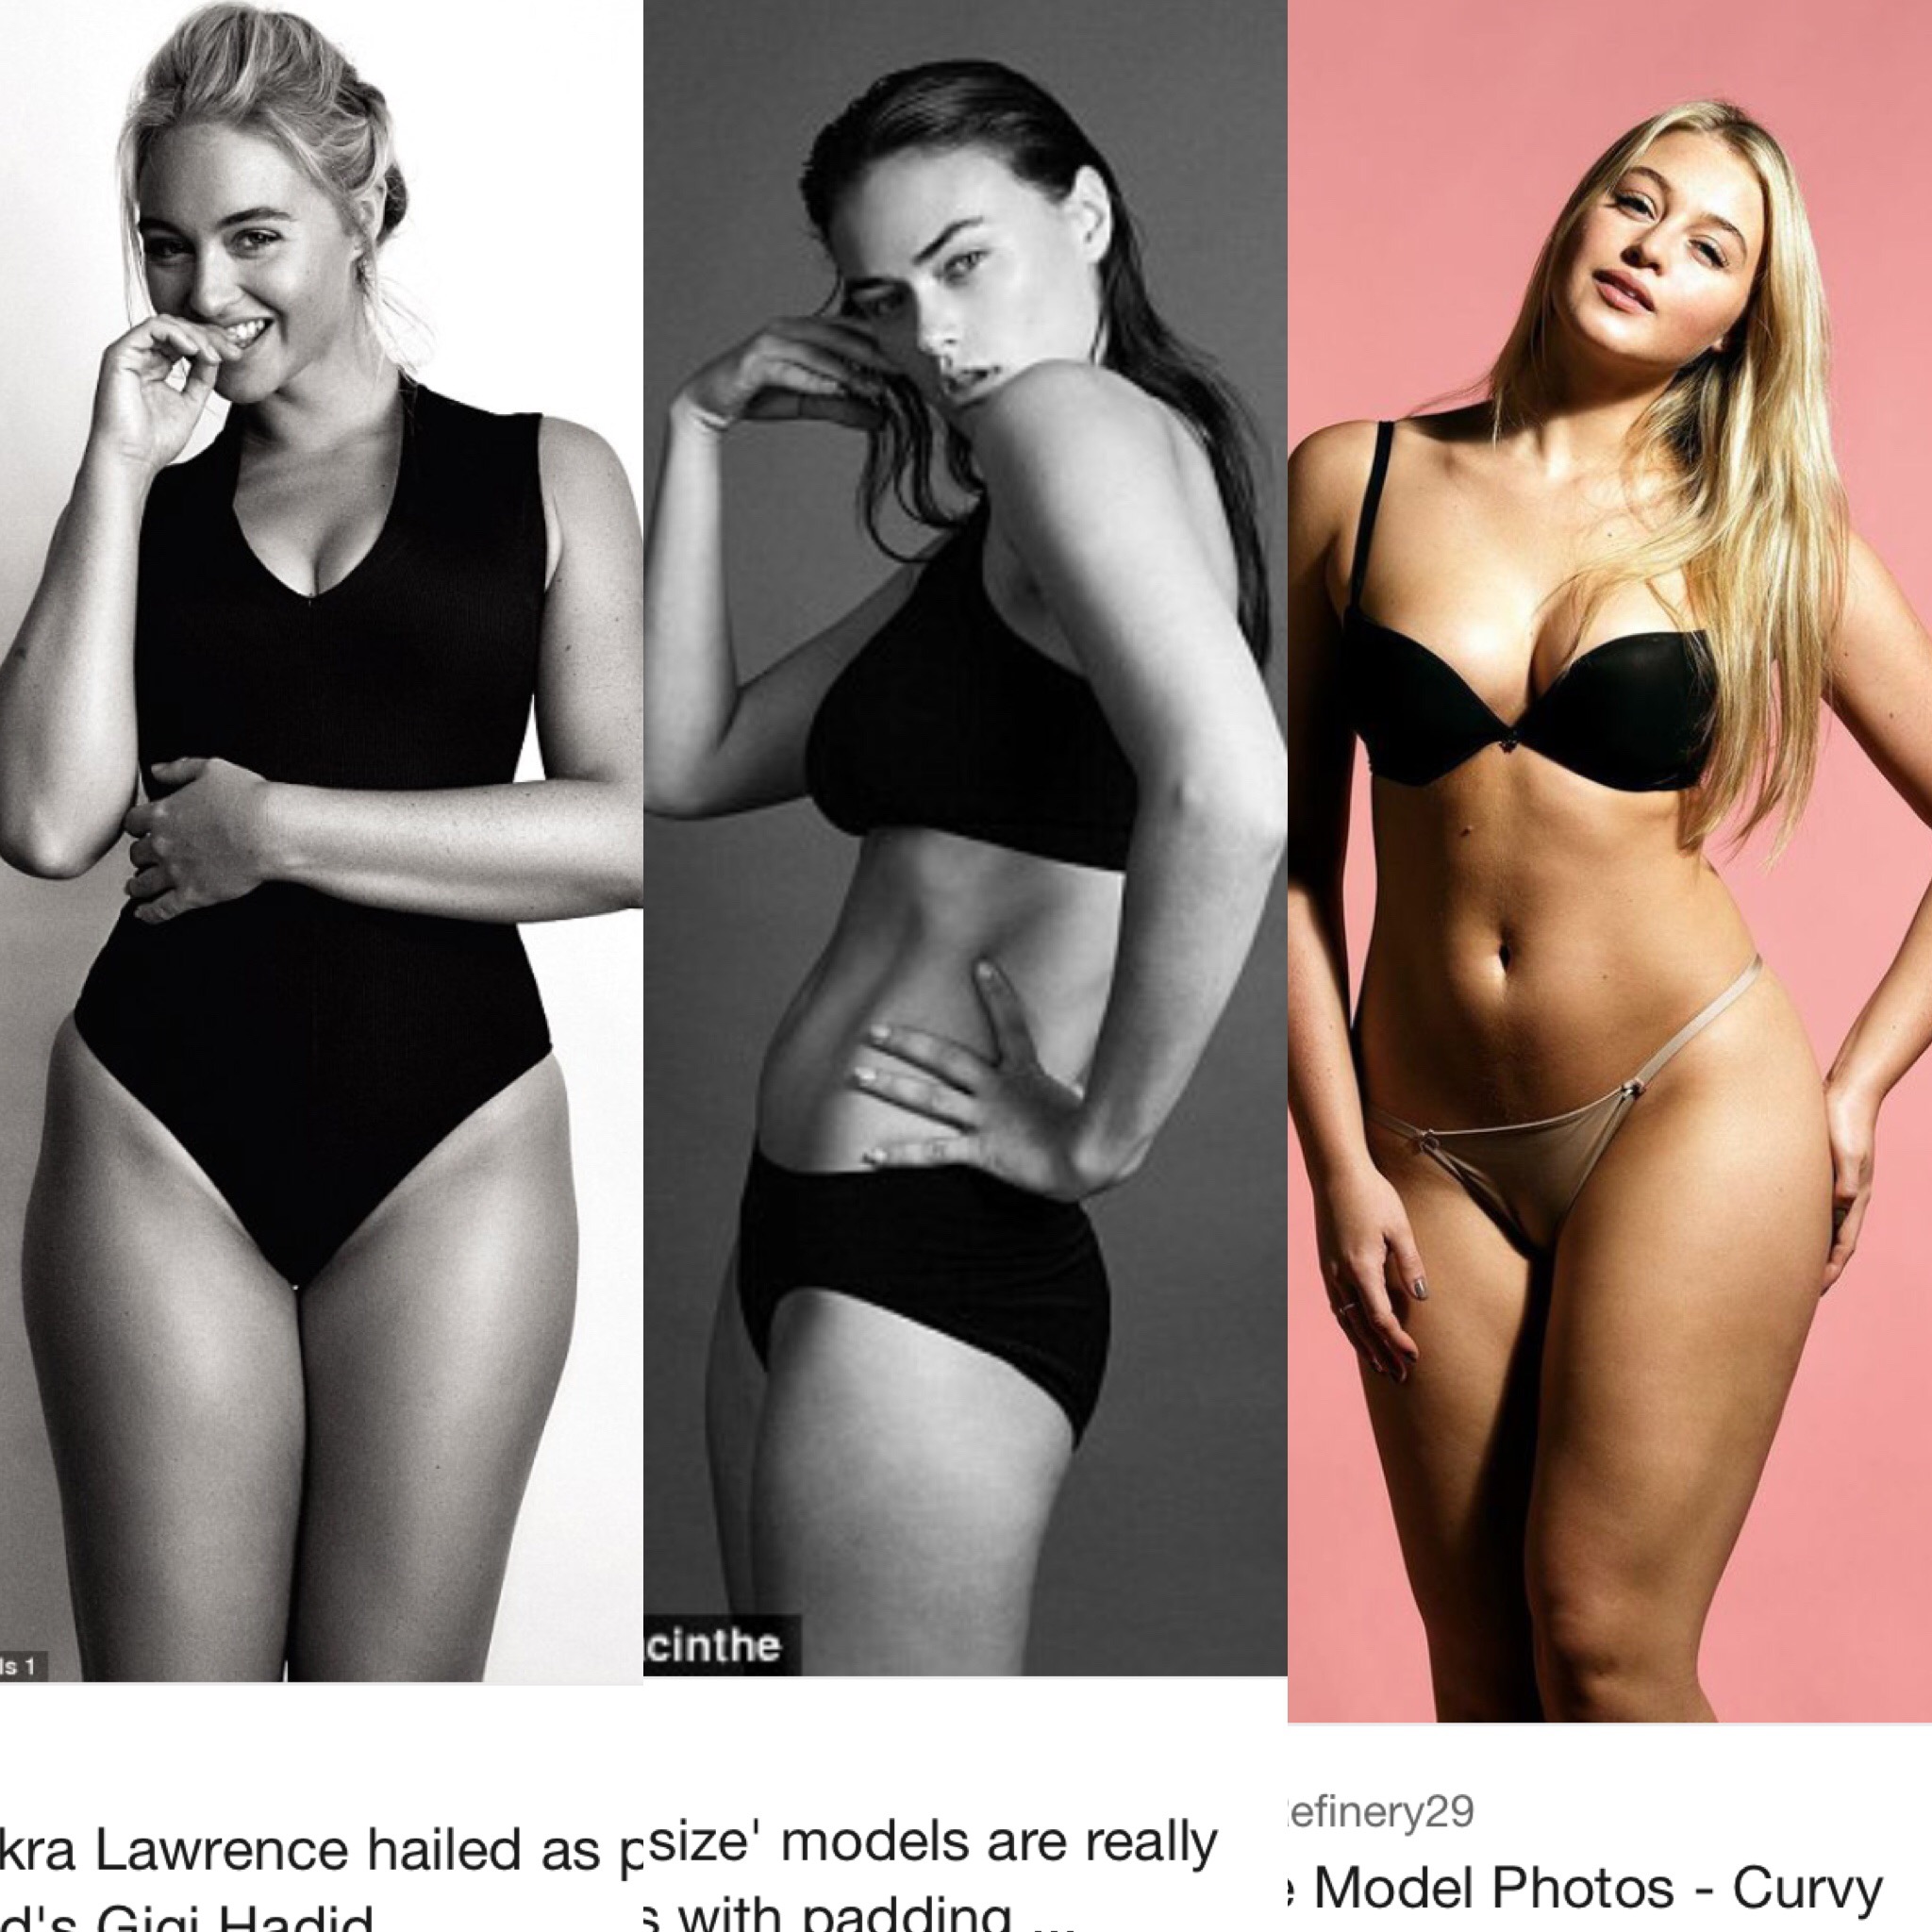 The real plus size models – Expectations in women's beauty